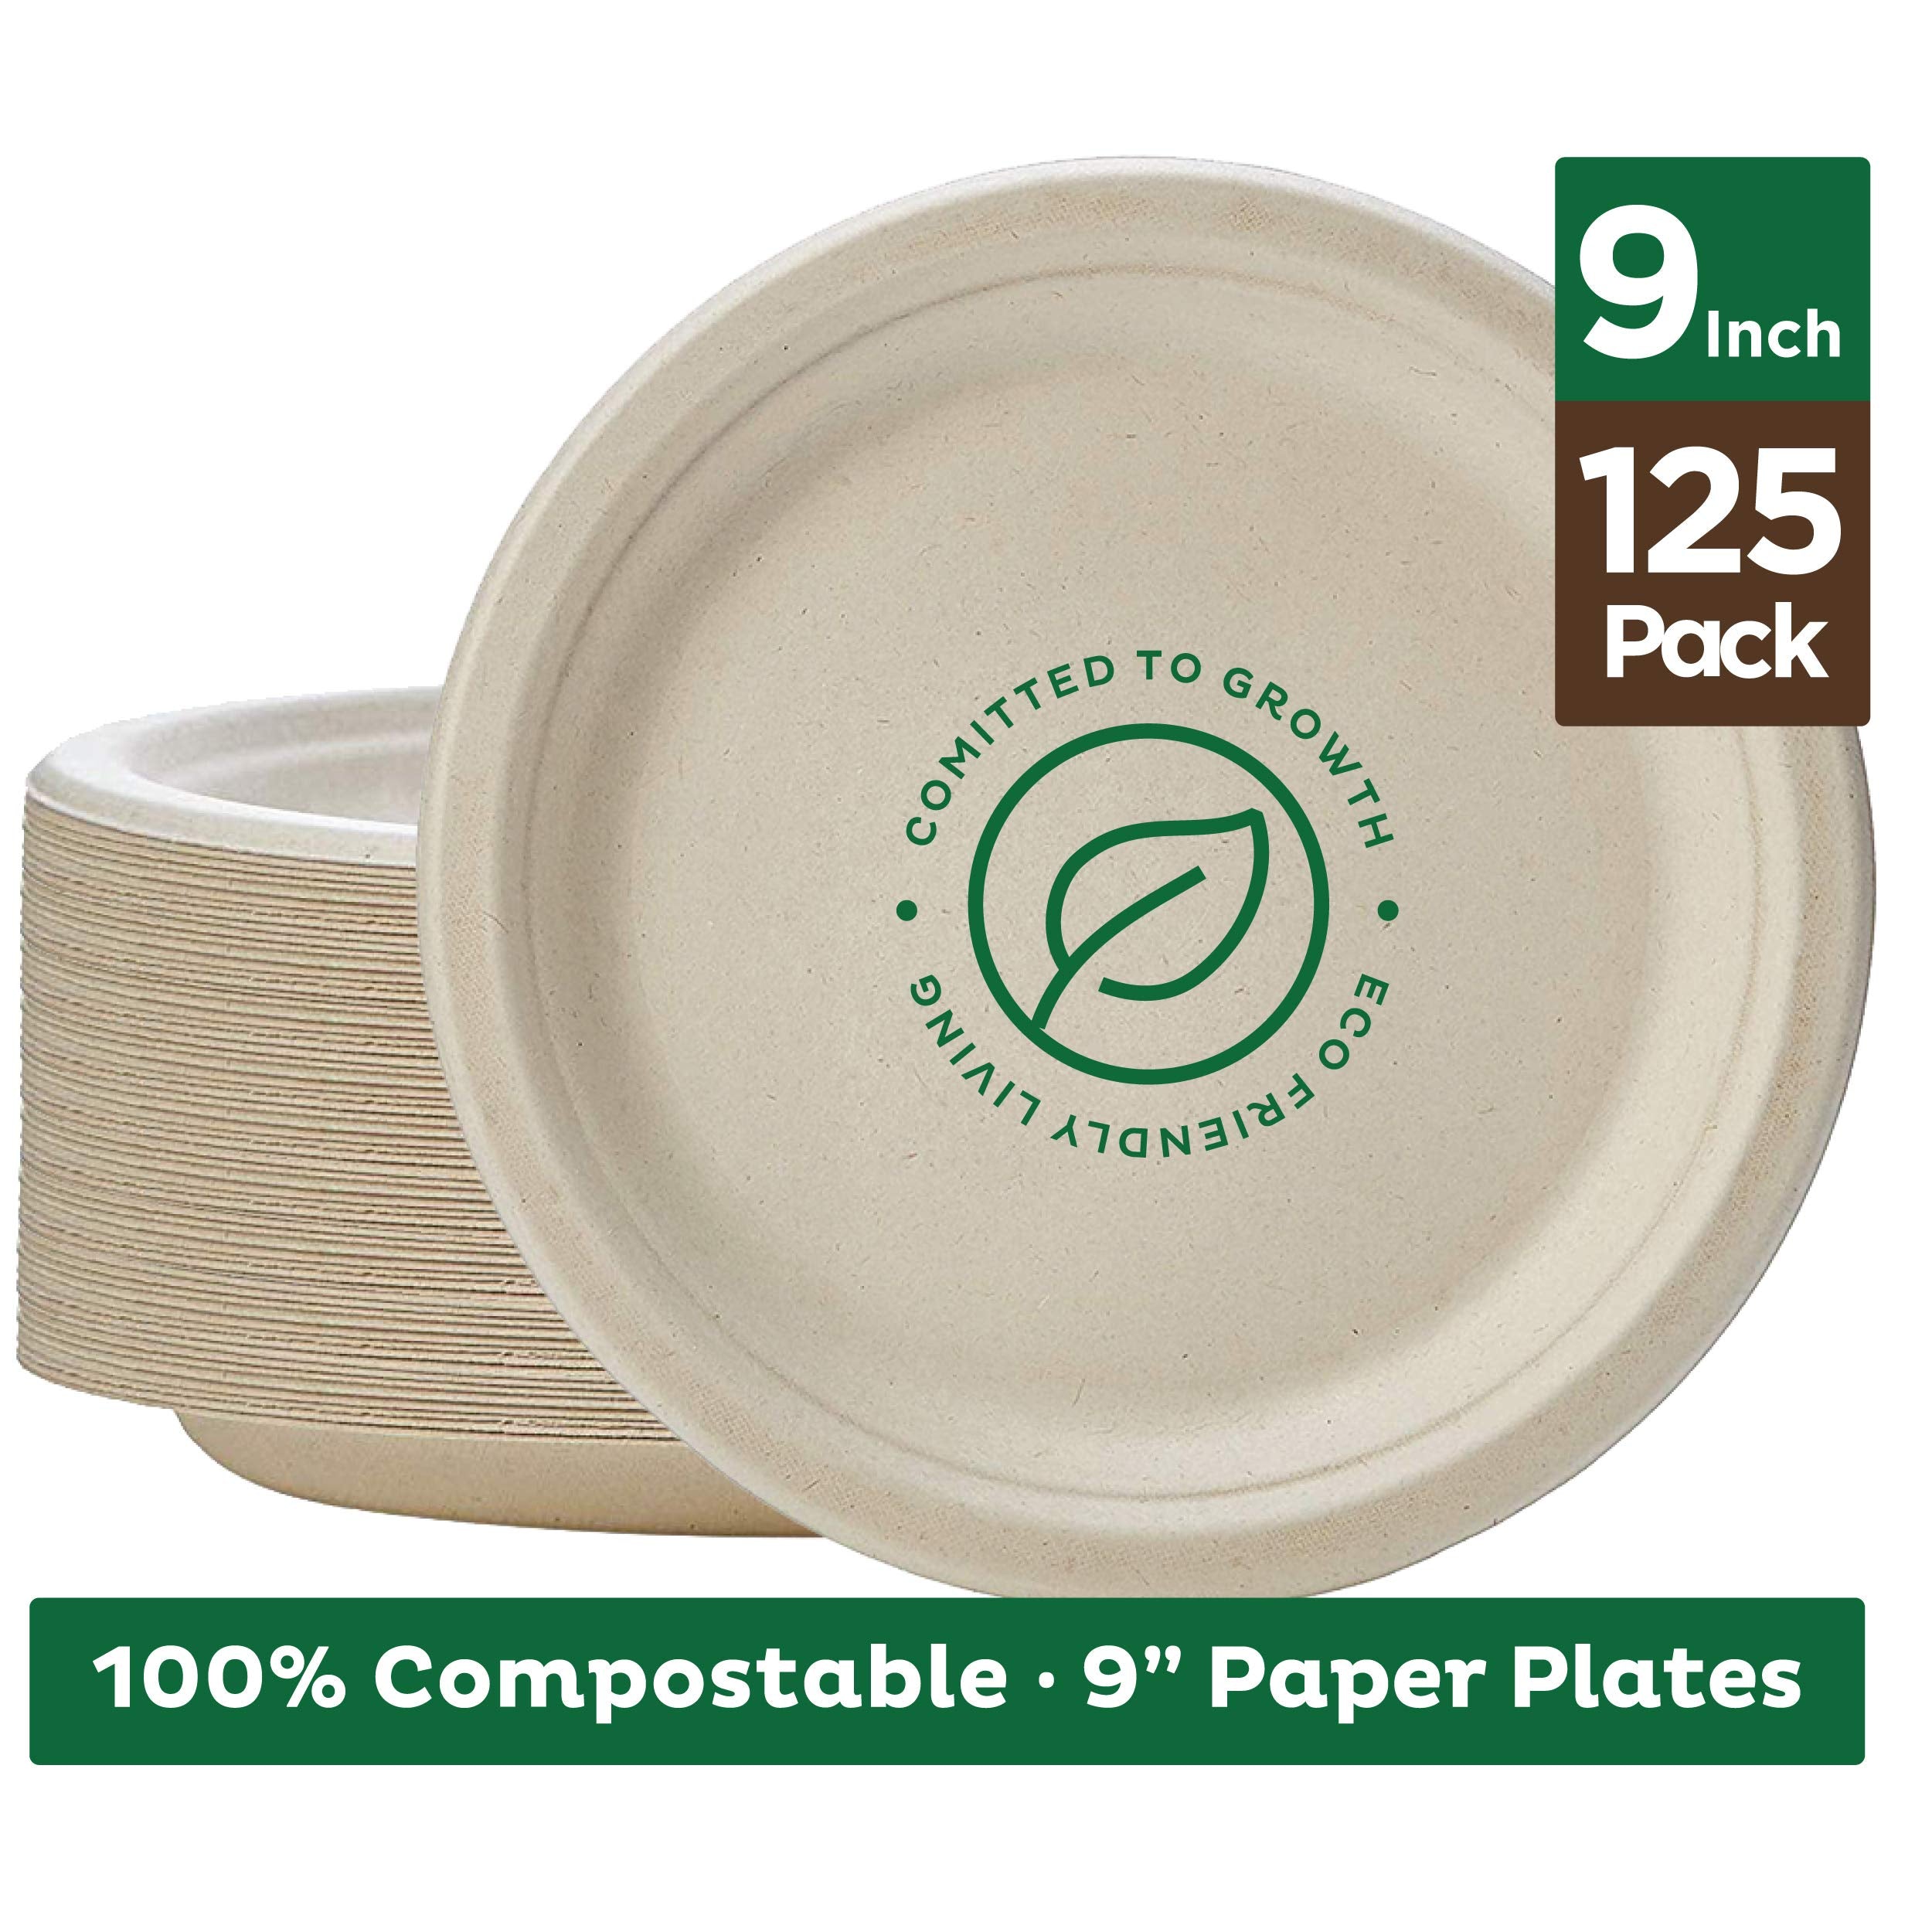 Stack Man 100% Compostable 9 Paper Plates [125-Pack] Heavy Duty